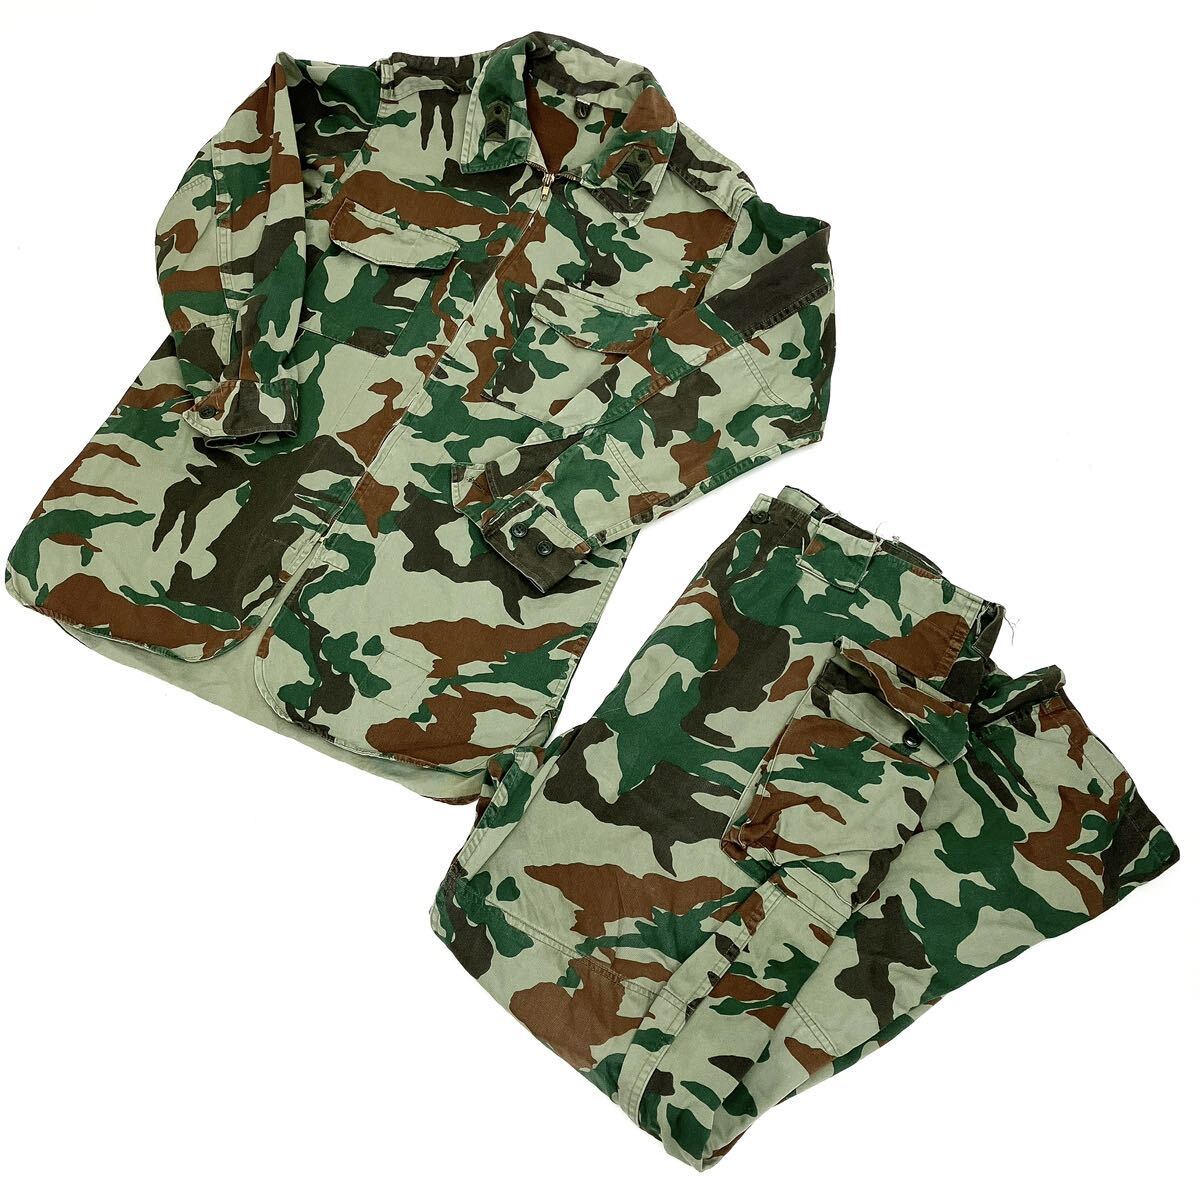  Ground Self-Defense Force old camouflage clothes top and bottom set 1. rank insignia collection alp shop 